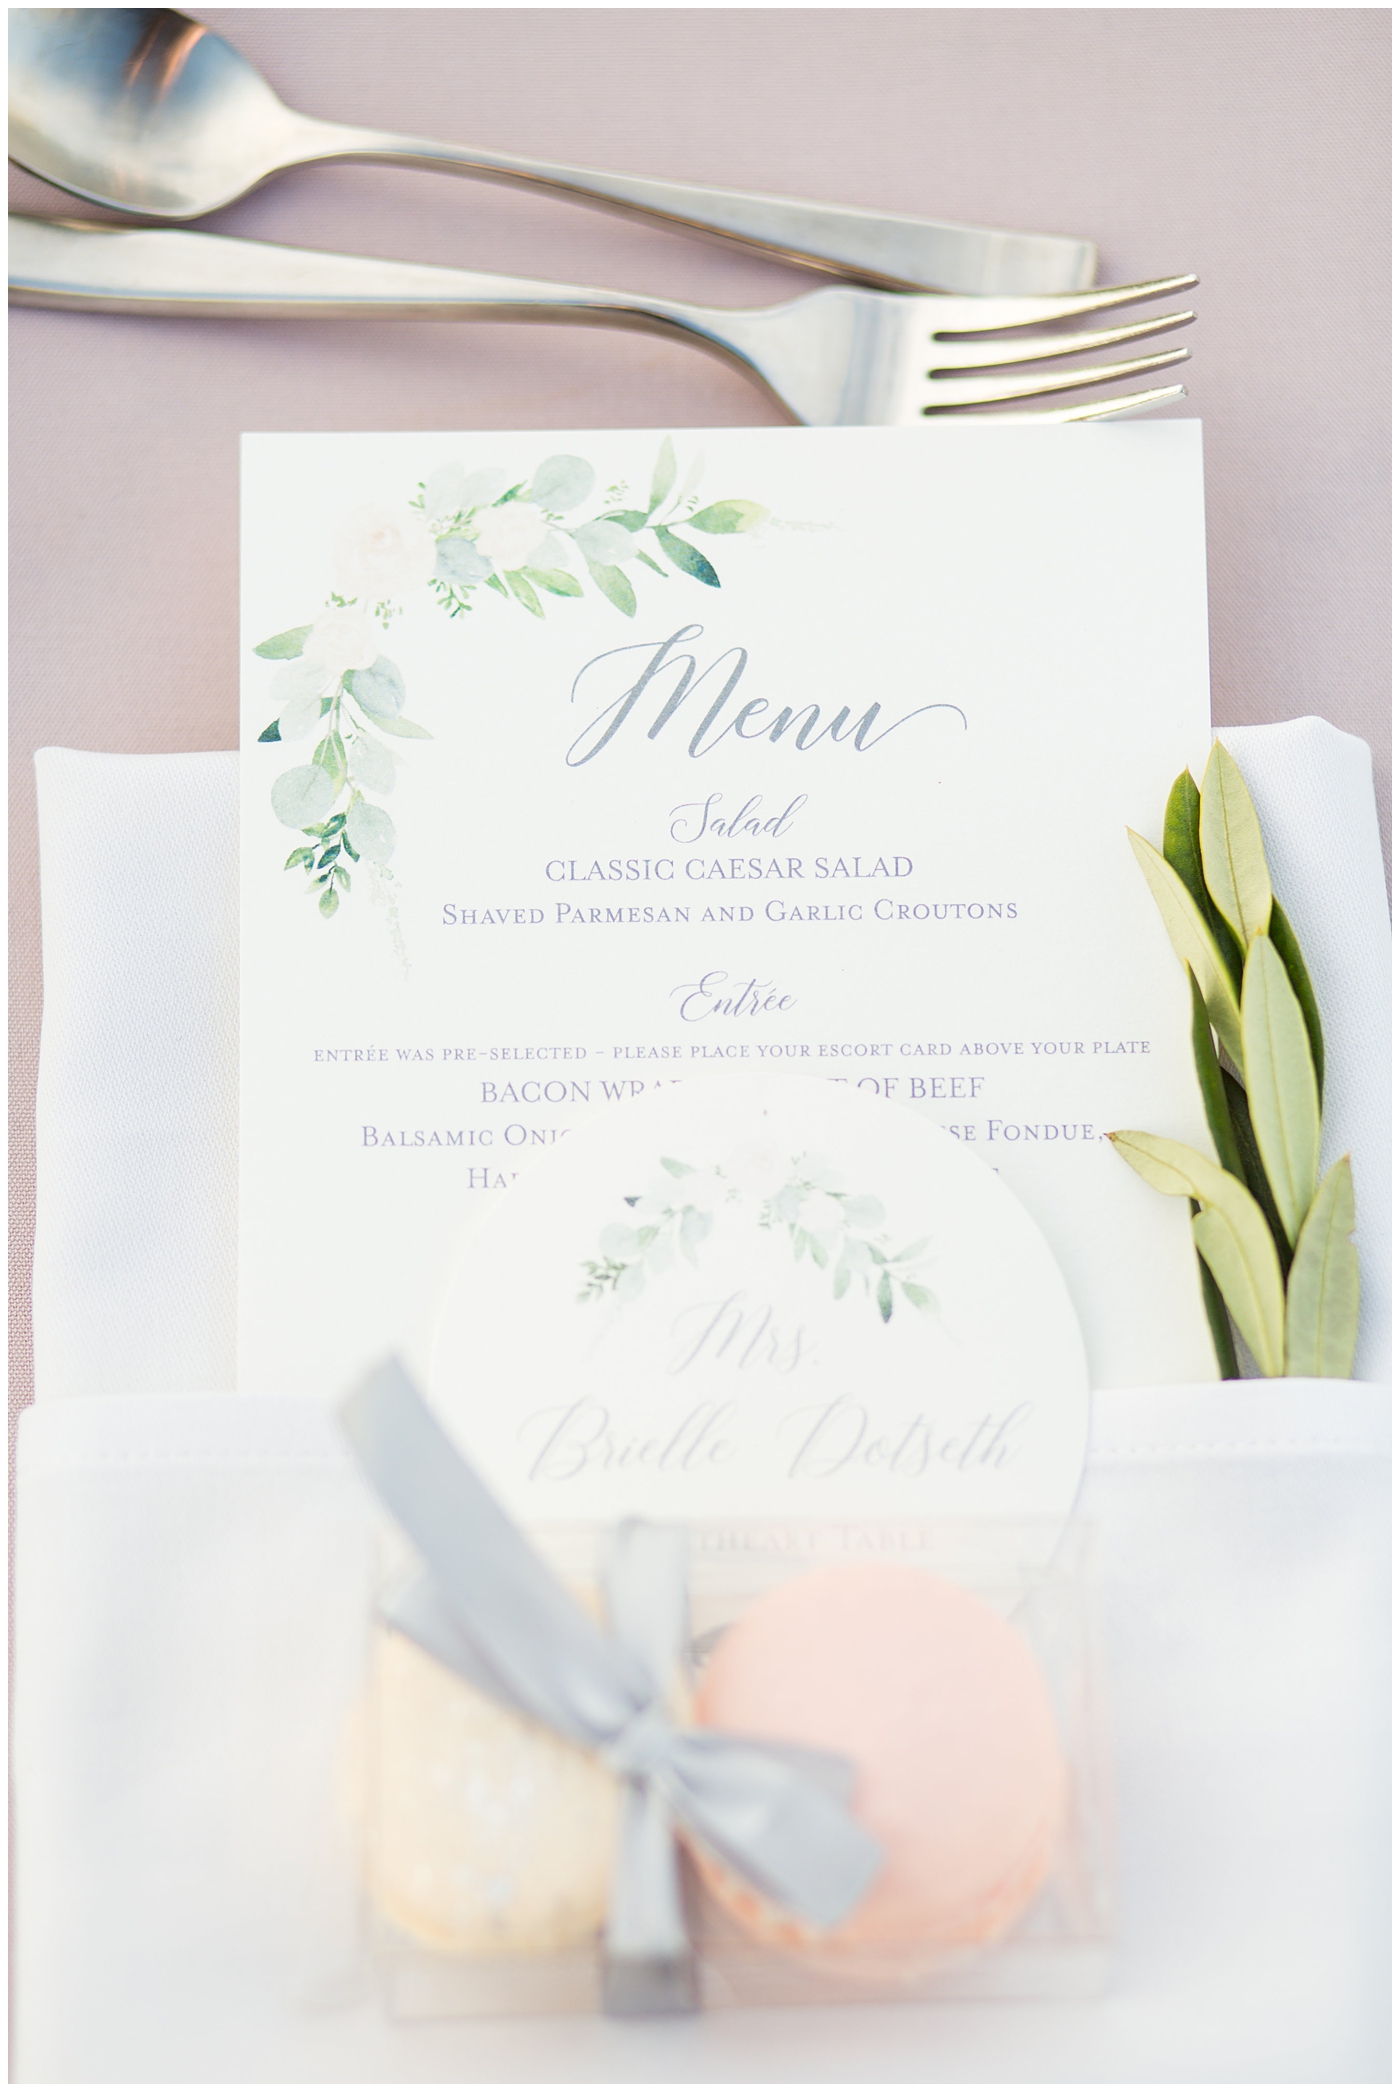 dinner menu for outdoor rooftop wedding reception in folded napkin with sprig of greenery and macaroons for guest gift on blush linen round tables table layout